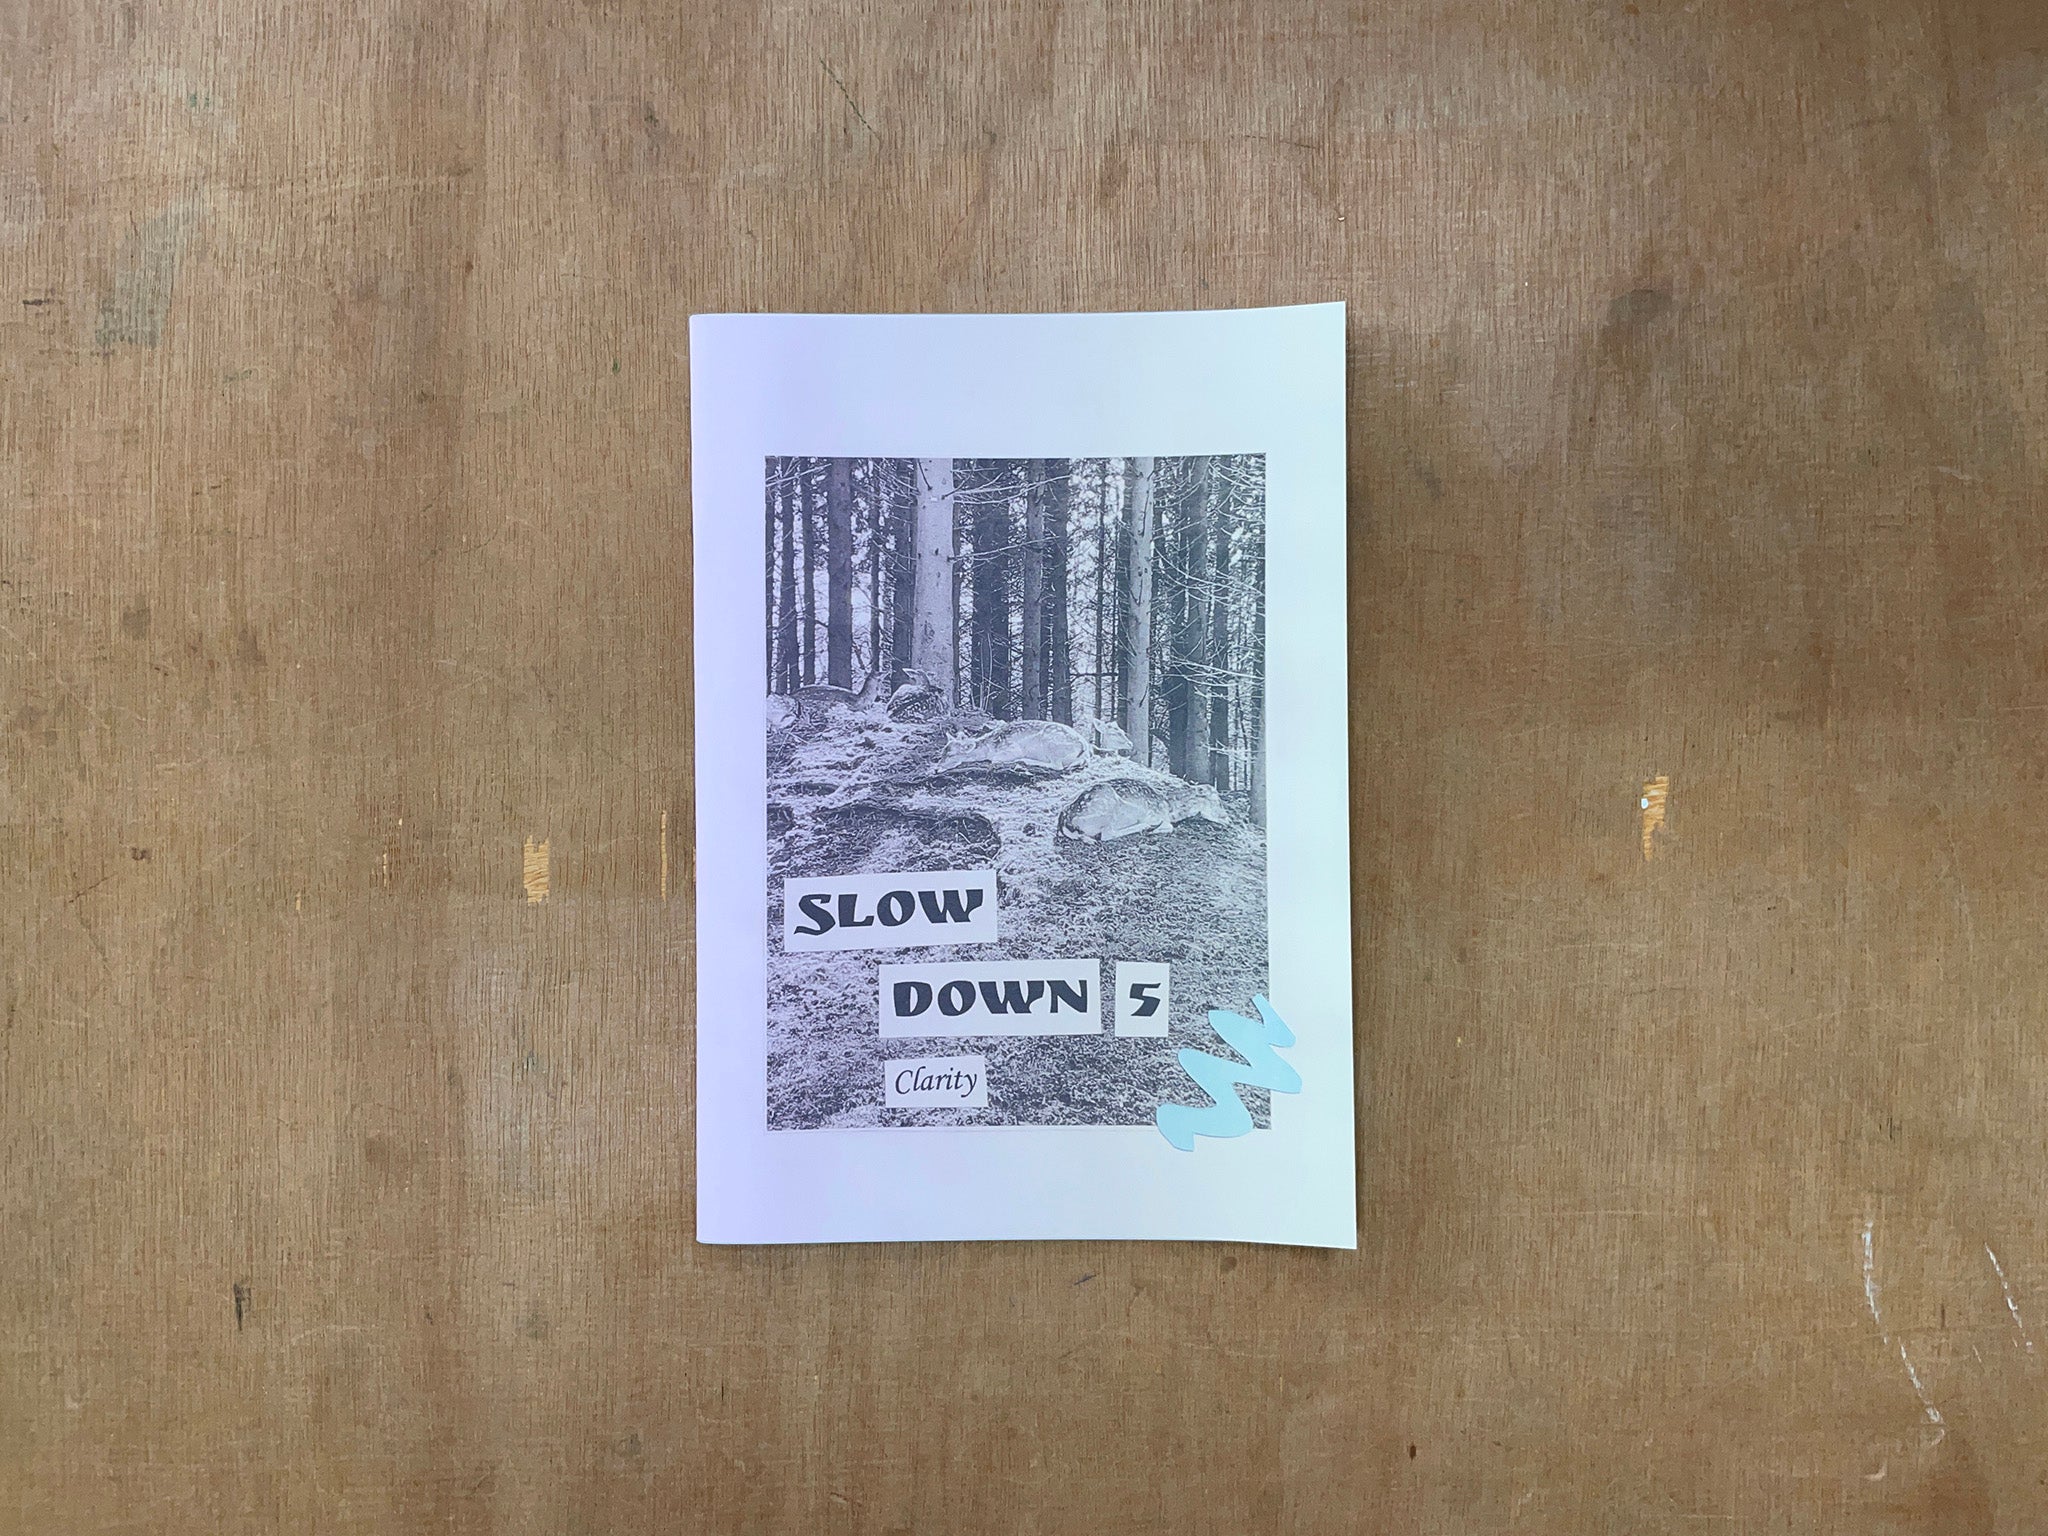 SLOW DOWN #5: CLARITY by River MacAskill